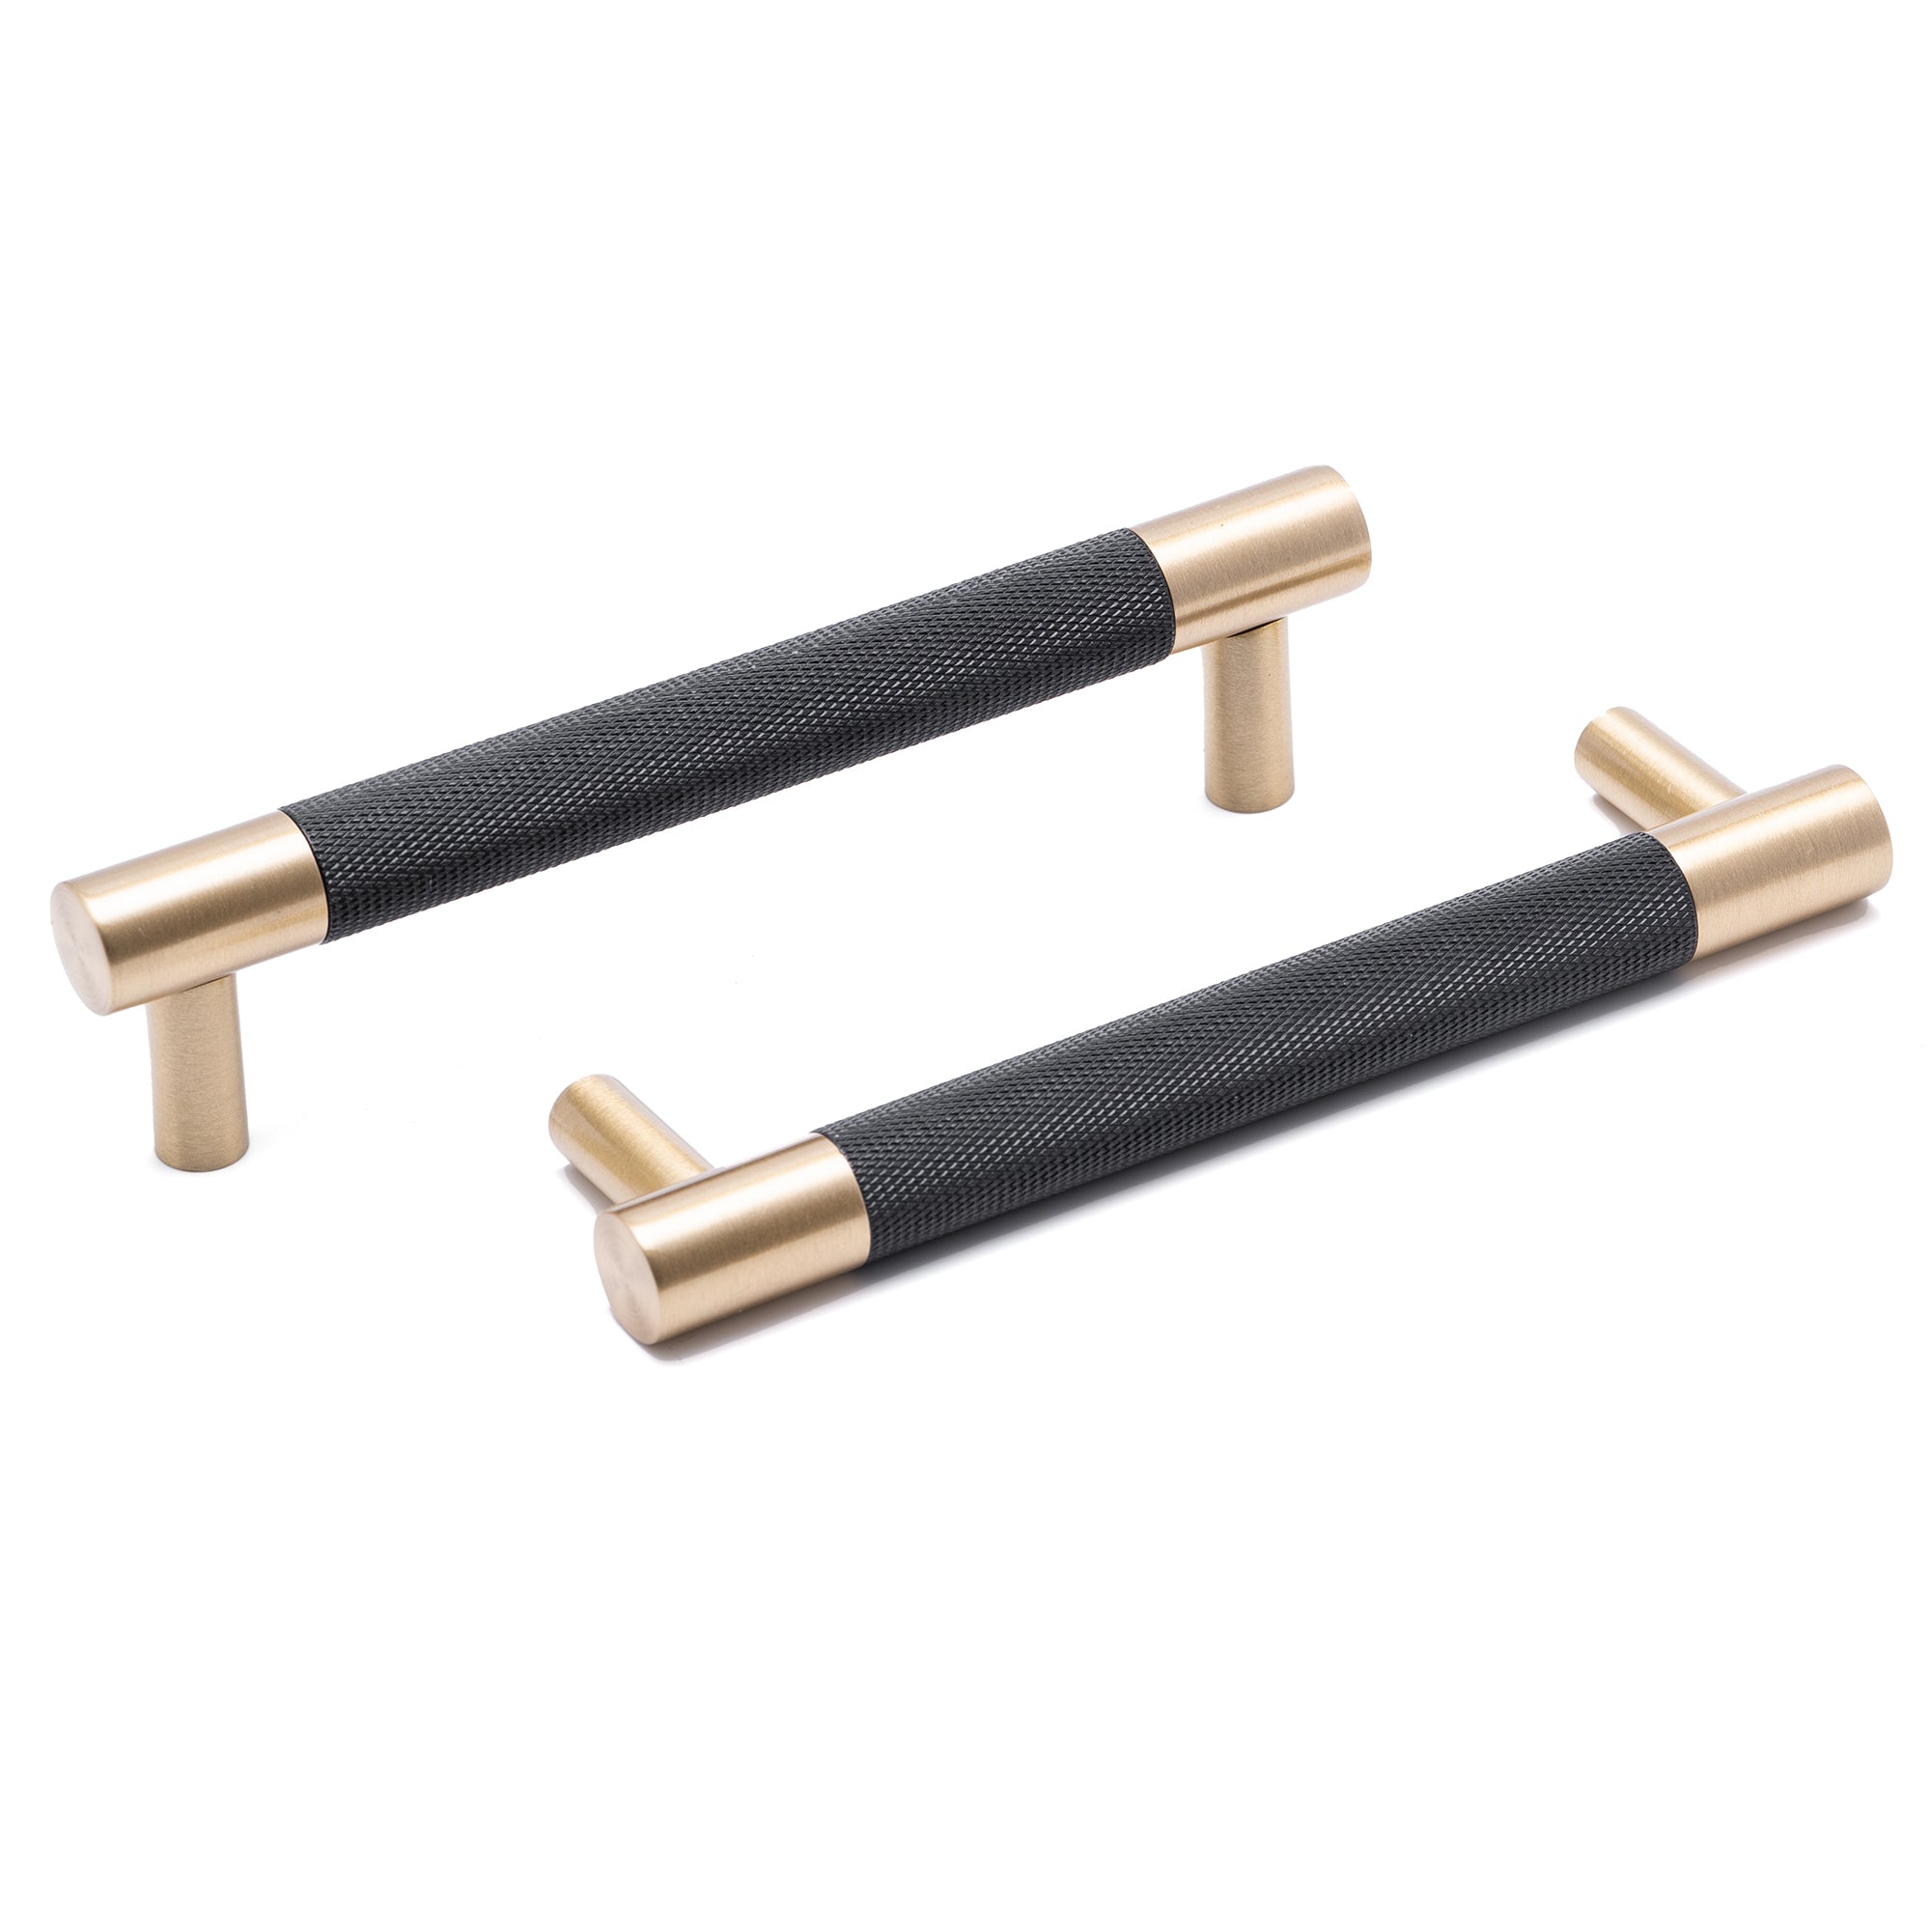 Cabinet Pulls Plama - Brushed Brass Pure Copper